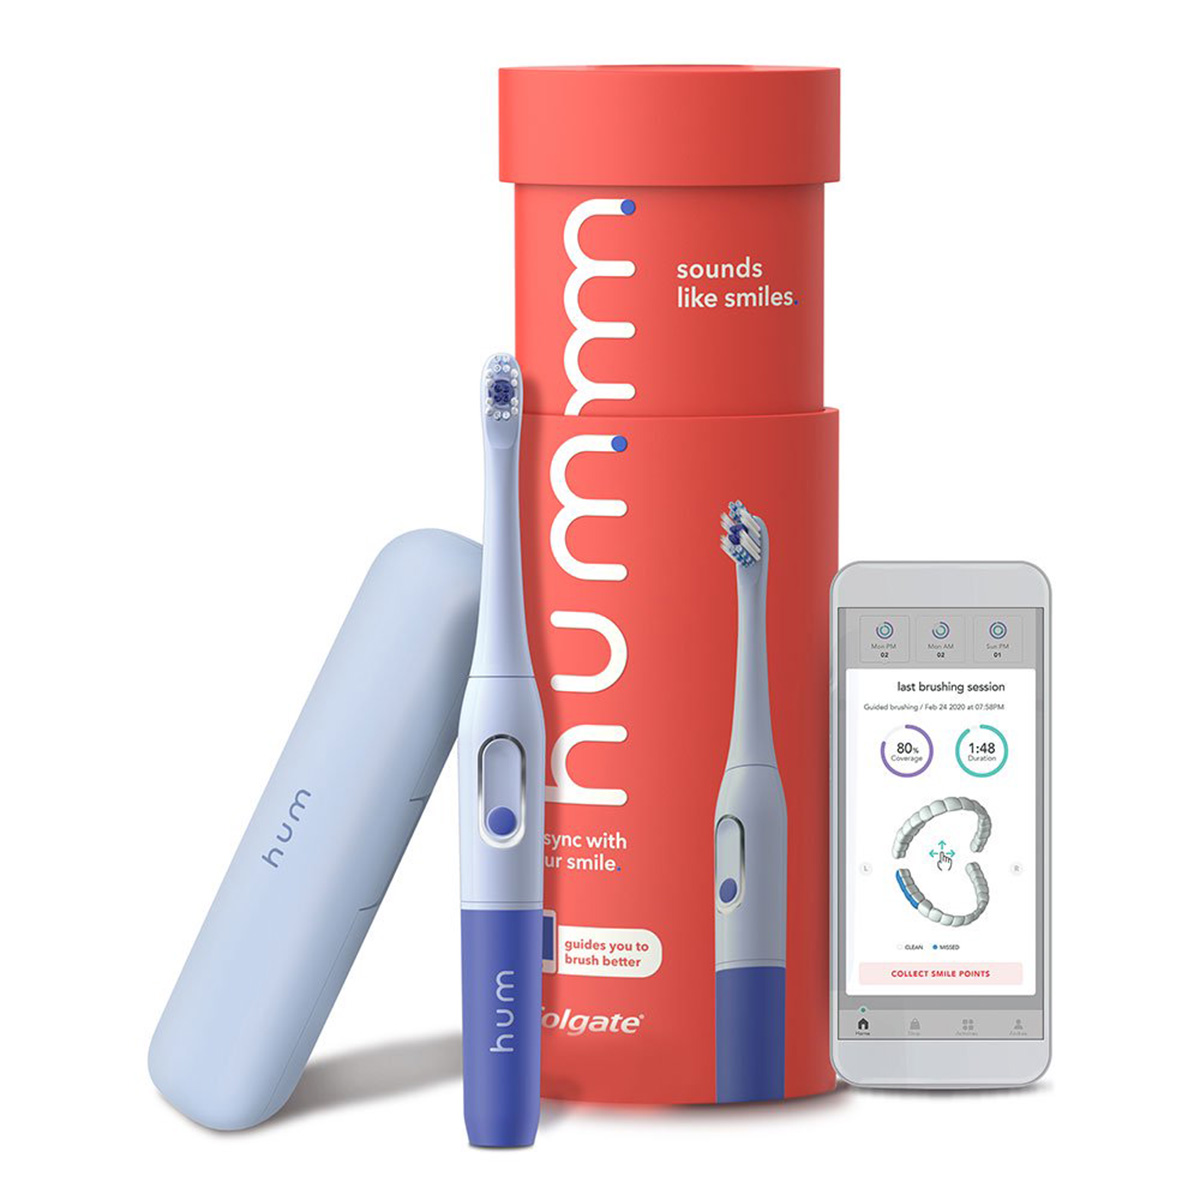 Colgate Hum Battery Operated Toothbrush - Blue